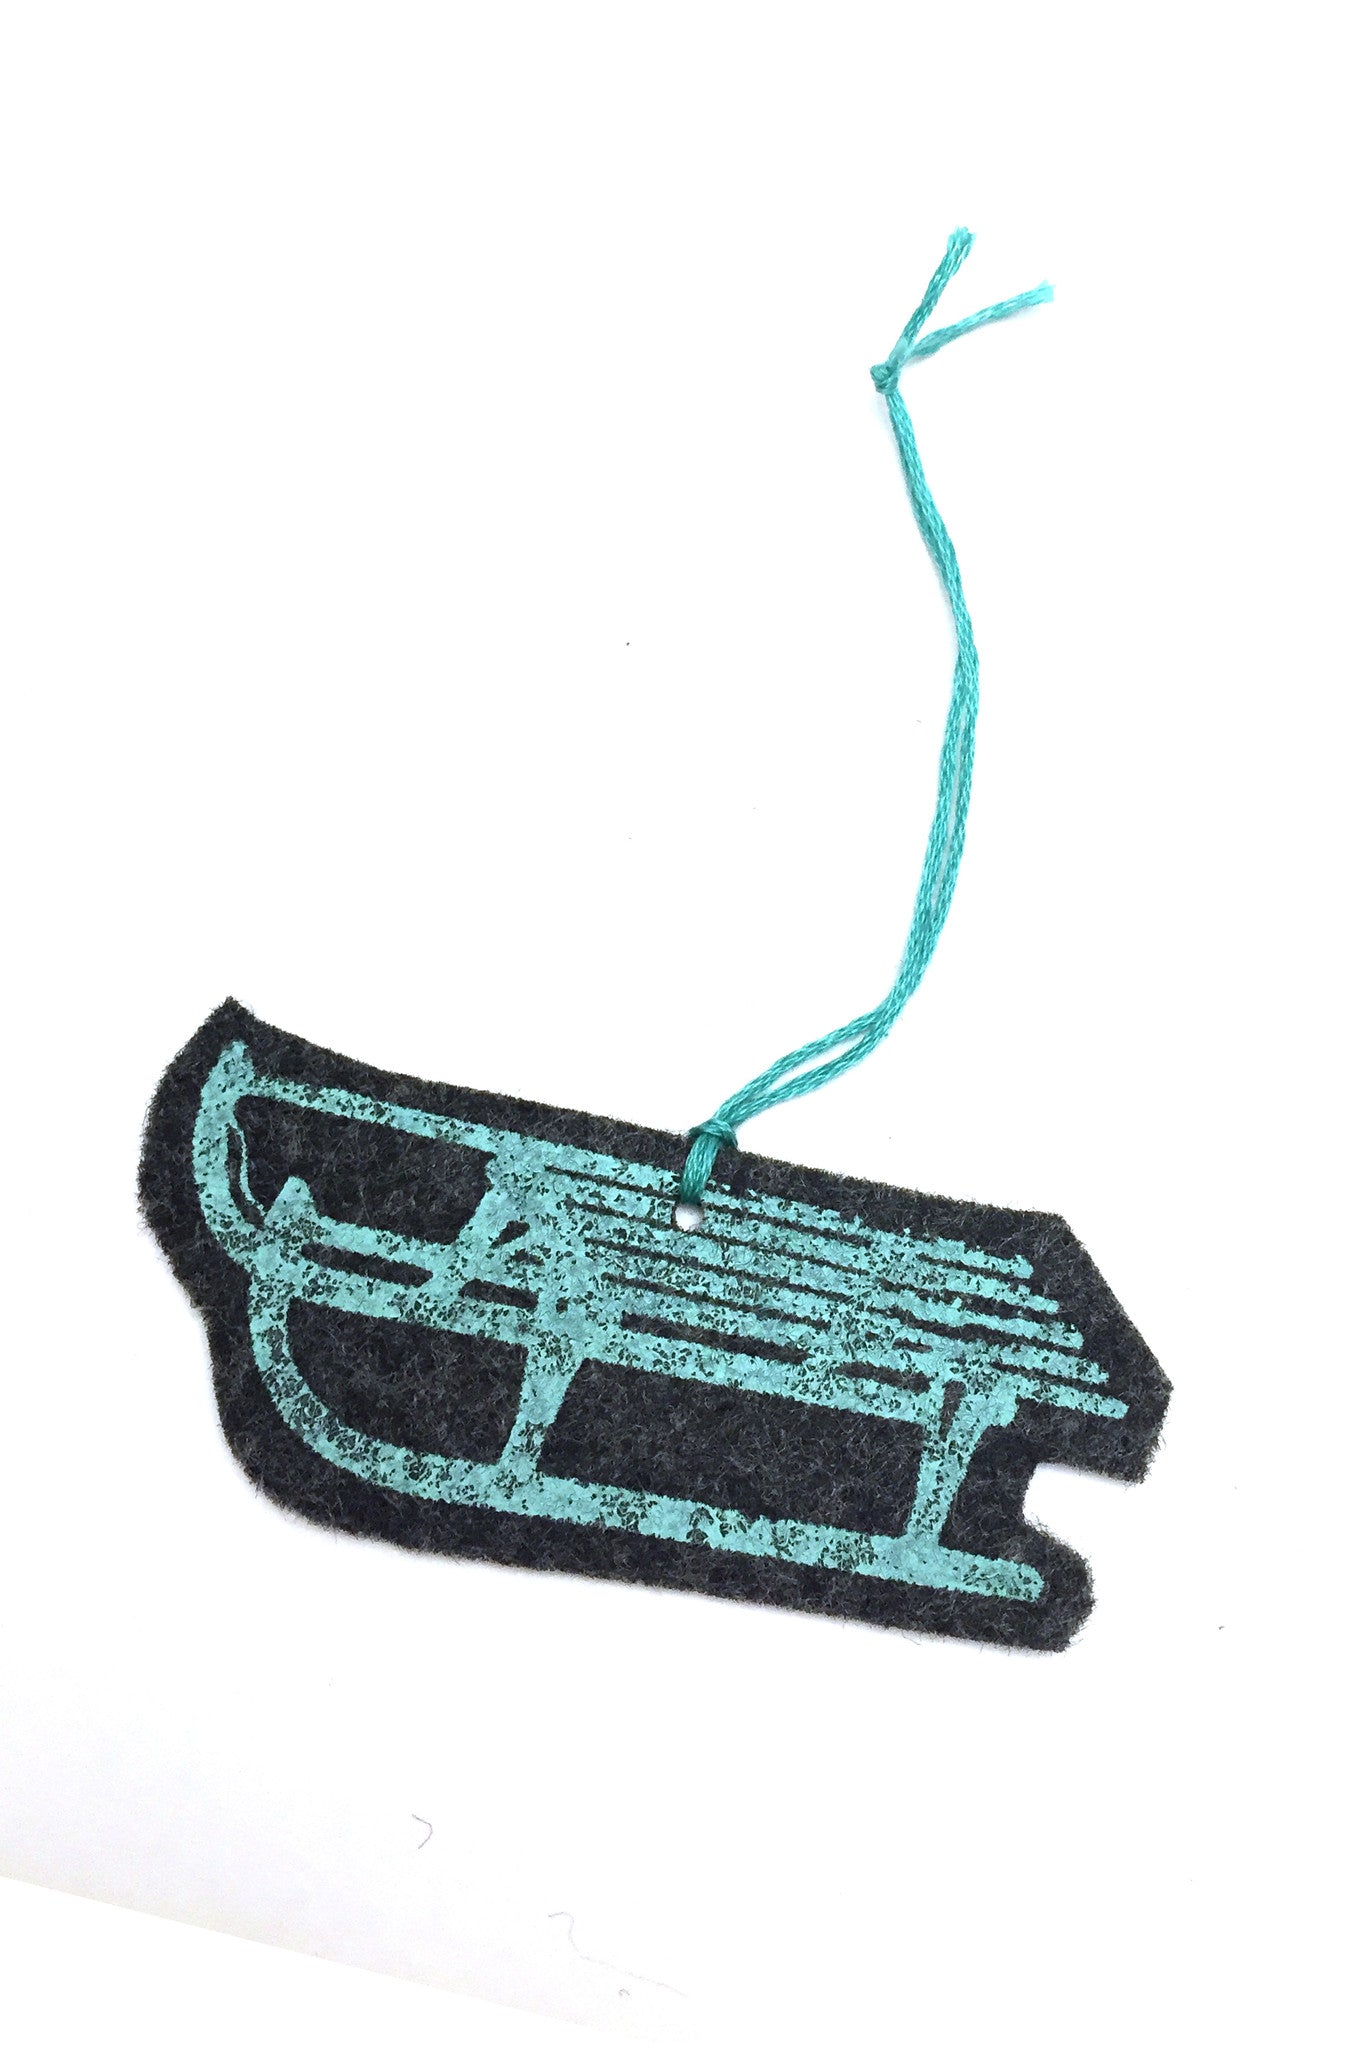 Turquoise sled ornament detail